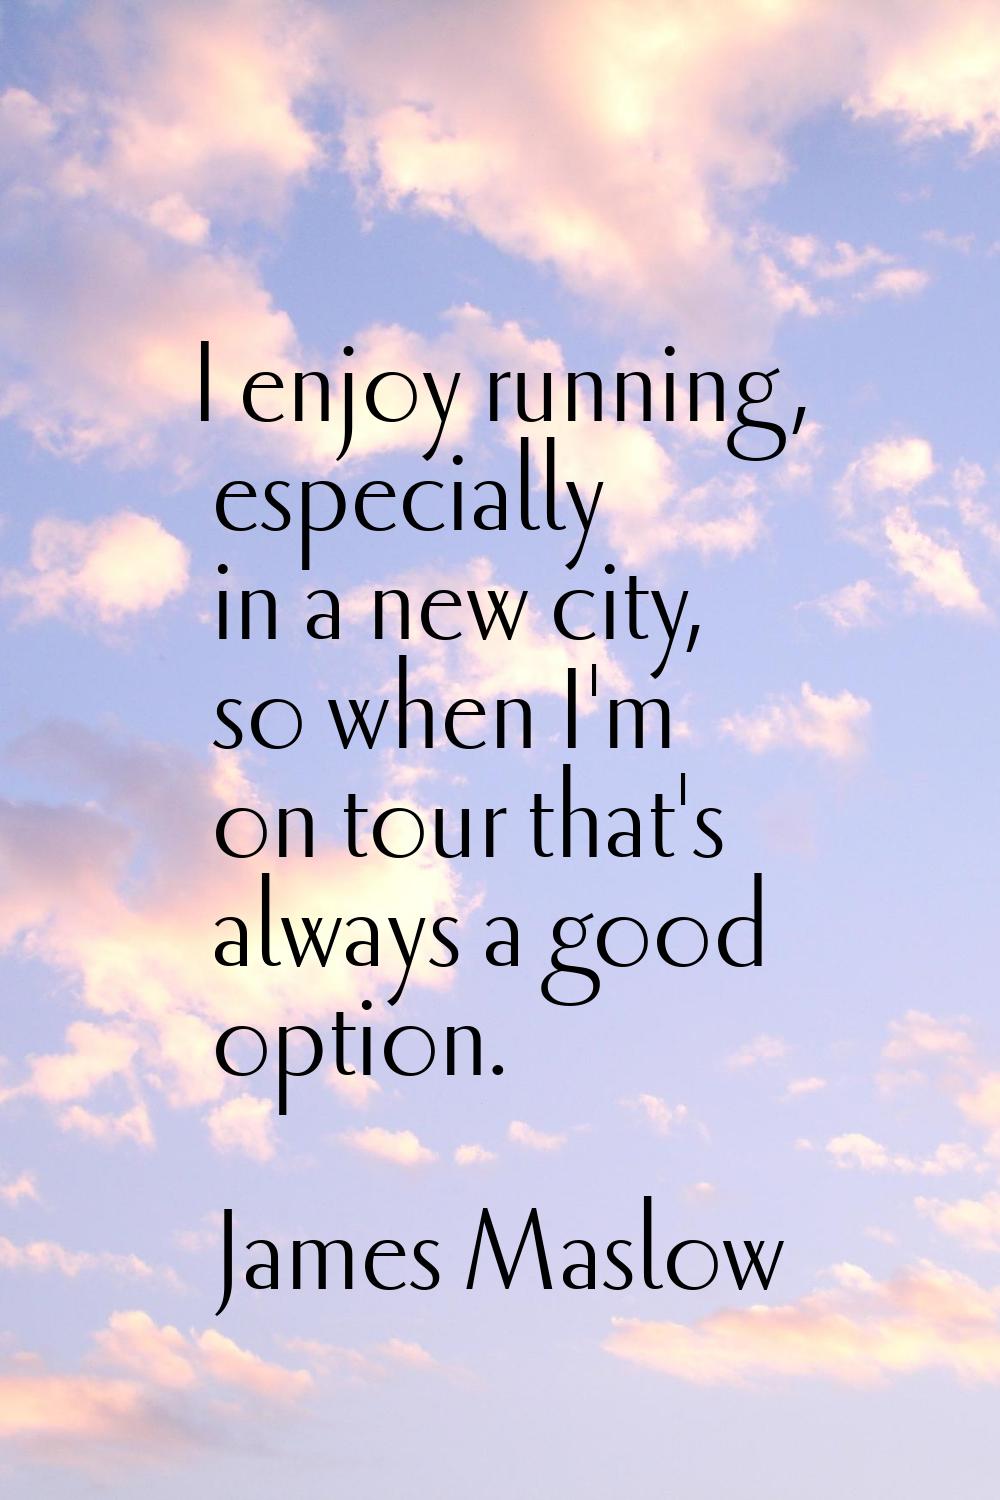 I enjoy running, especially in a new city, so when I'm on tour that's always a good option.